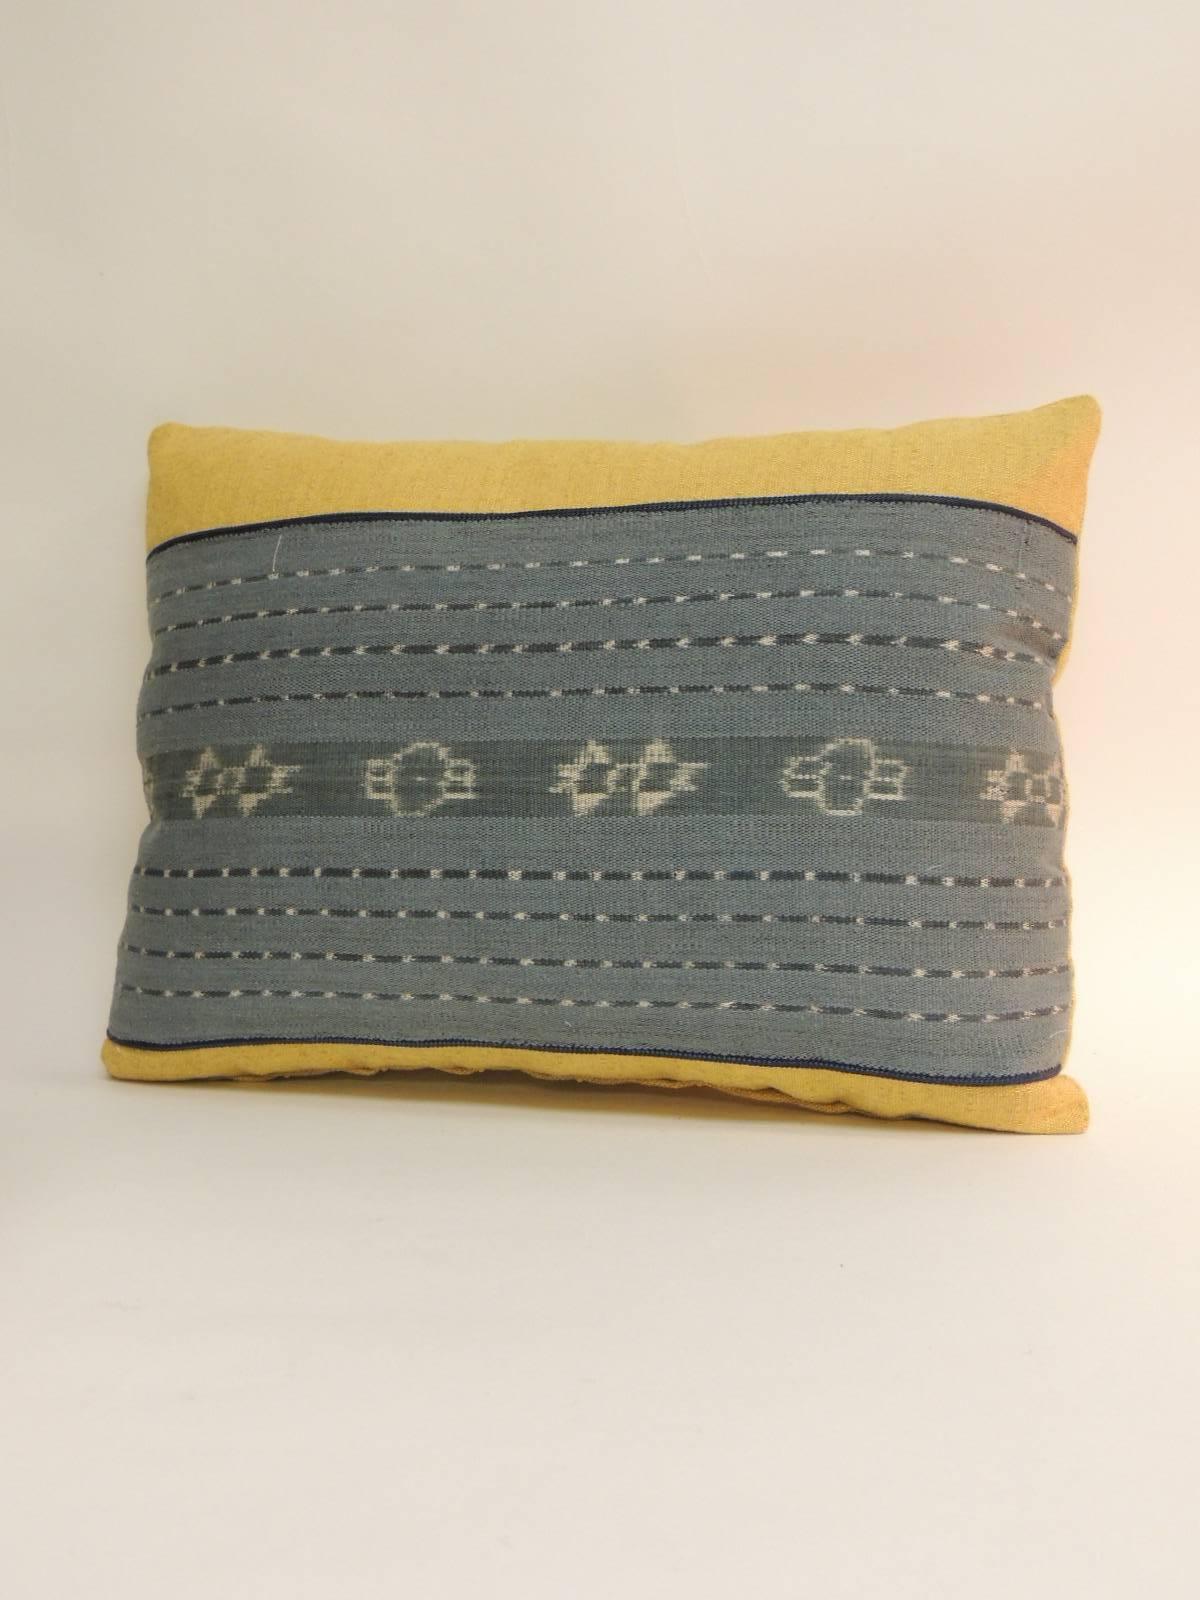 Pair of vintage white and blue tribal vintage textile designed decorative pillows. Woven antique textile center panel framed with heavy yellow linen same as backing. Throw bolster Ikat pillows embellished with a small silk custom-made rope trim.